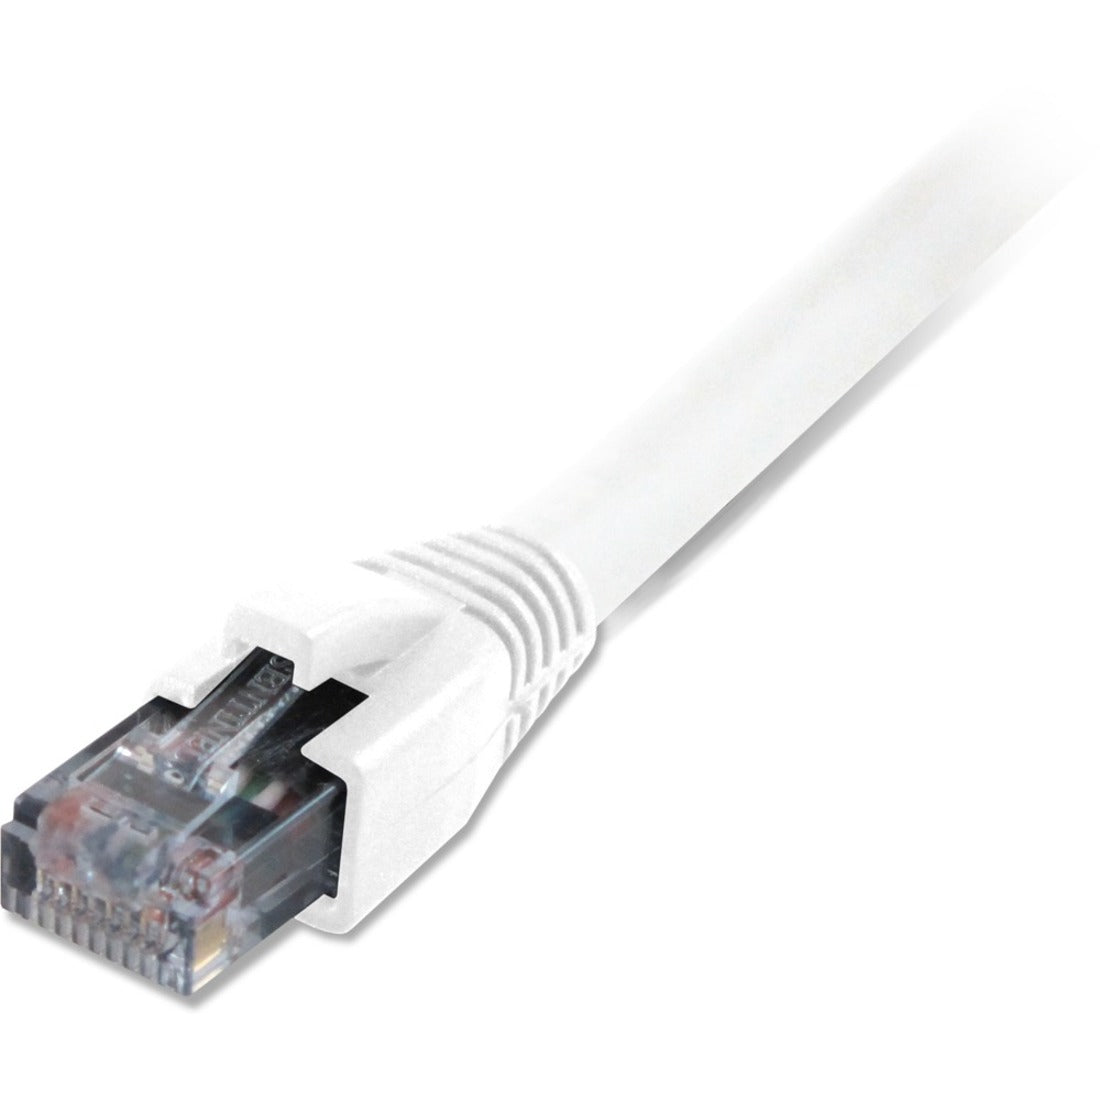 Comprehensive CAT5-350-7WHT Cat5e 350 Mhz Snagless Patch Cable 7ft White, Molded, Strain Relief, Stranded, Booted, 1 Gbit/s Data Transfer Rate